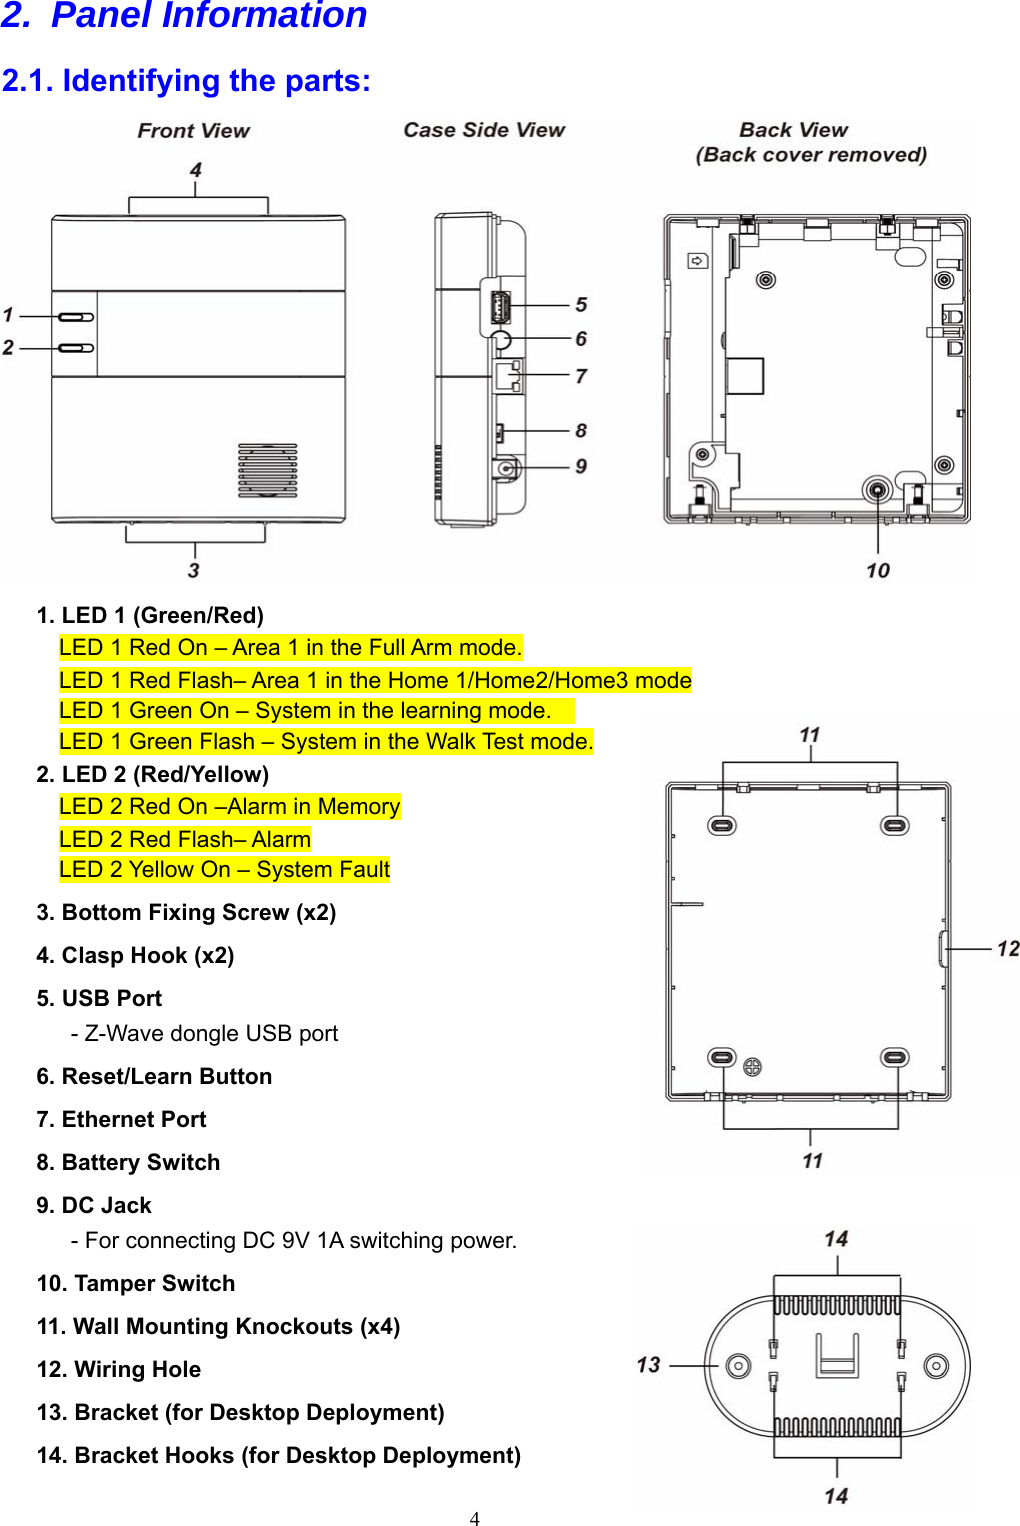  4 2. Panel Information  2.1. Identifying the parts:  1. LED 1 (Green/Red)     LED 1 Red On – Area 1 in the Full Arm mode. LED 1 Red Flash– Area 1 in the Home 1/Home2/Home3 mode LED 1 Green On – System in the learning mode.     LED 1 Green Flash – System in the Walk Test mode.       2. LED 2 (Red/Yellow) LED 2 Red On –Alarm in Memory LED 2 Red Flash– Alarm LED 2 Yellow On – System Fault     3. Bottom Fixing Screw (x2) 4. Clasp Hook (x2) 5. USB Port      - Z-Wave dongle USB port   6. Reset/Learn Button     7. Ethernet Port   8. Battery Switch 9. DC Jack       - For connecting DC 9V 1A switching power.     10. Tamper Switch 11. Wall Mounting Knockouts (x4) 12. Wiring Hole     13. Bracket (for Desktop Deployment) 14. Bracket Hooks (for Desktop Deployment) 